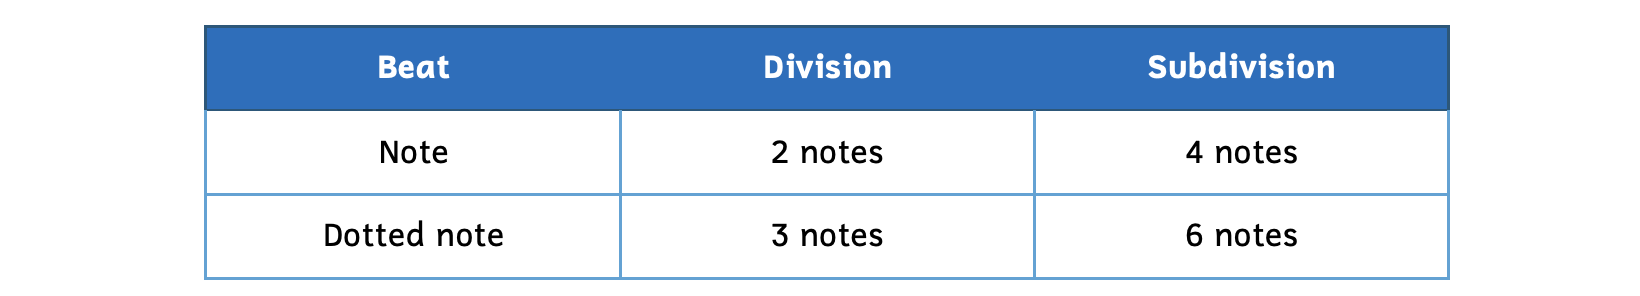 Table summarizing divisions and subdivisions. The first column shows the beat, the second column shows the division, and the third column shows the subdivision. The first row shows that the beat is a note, the division is 2 notes, and the subdivision is 4 notes. The second row shows that the beat is a dotted note, the division is 3 notes, and the subdivision is 6 notes.